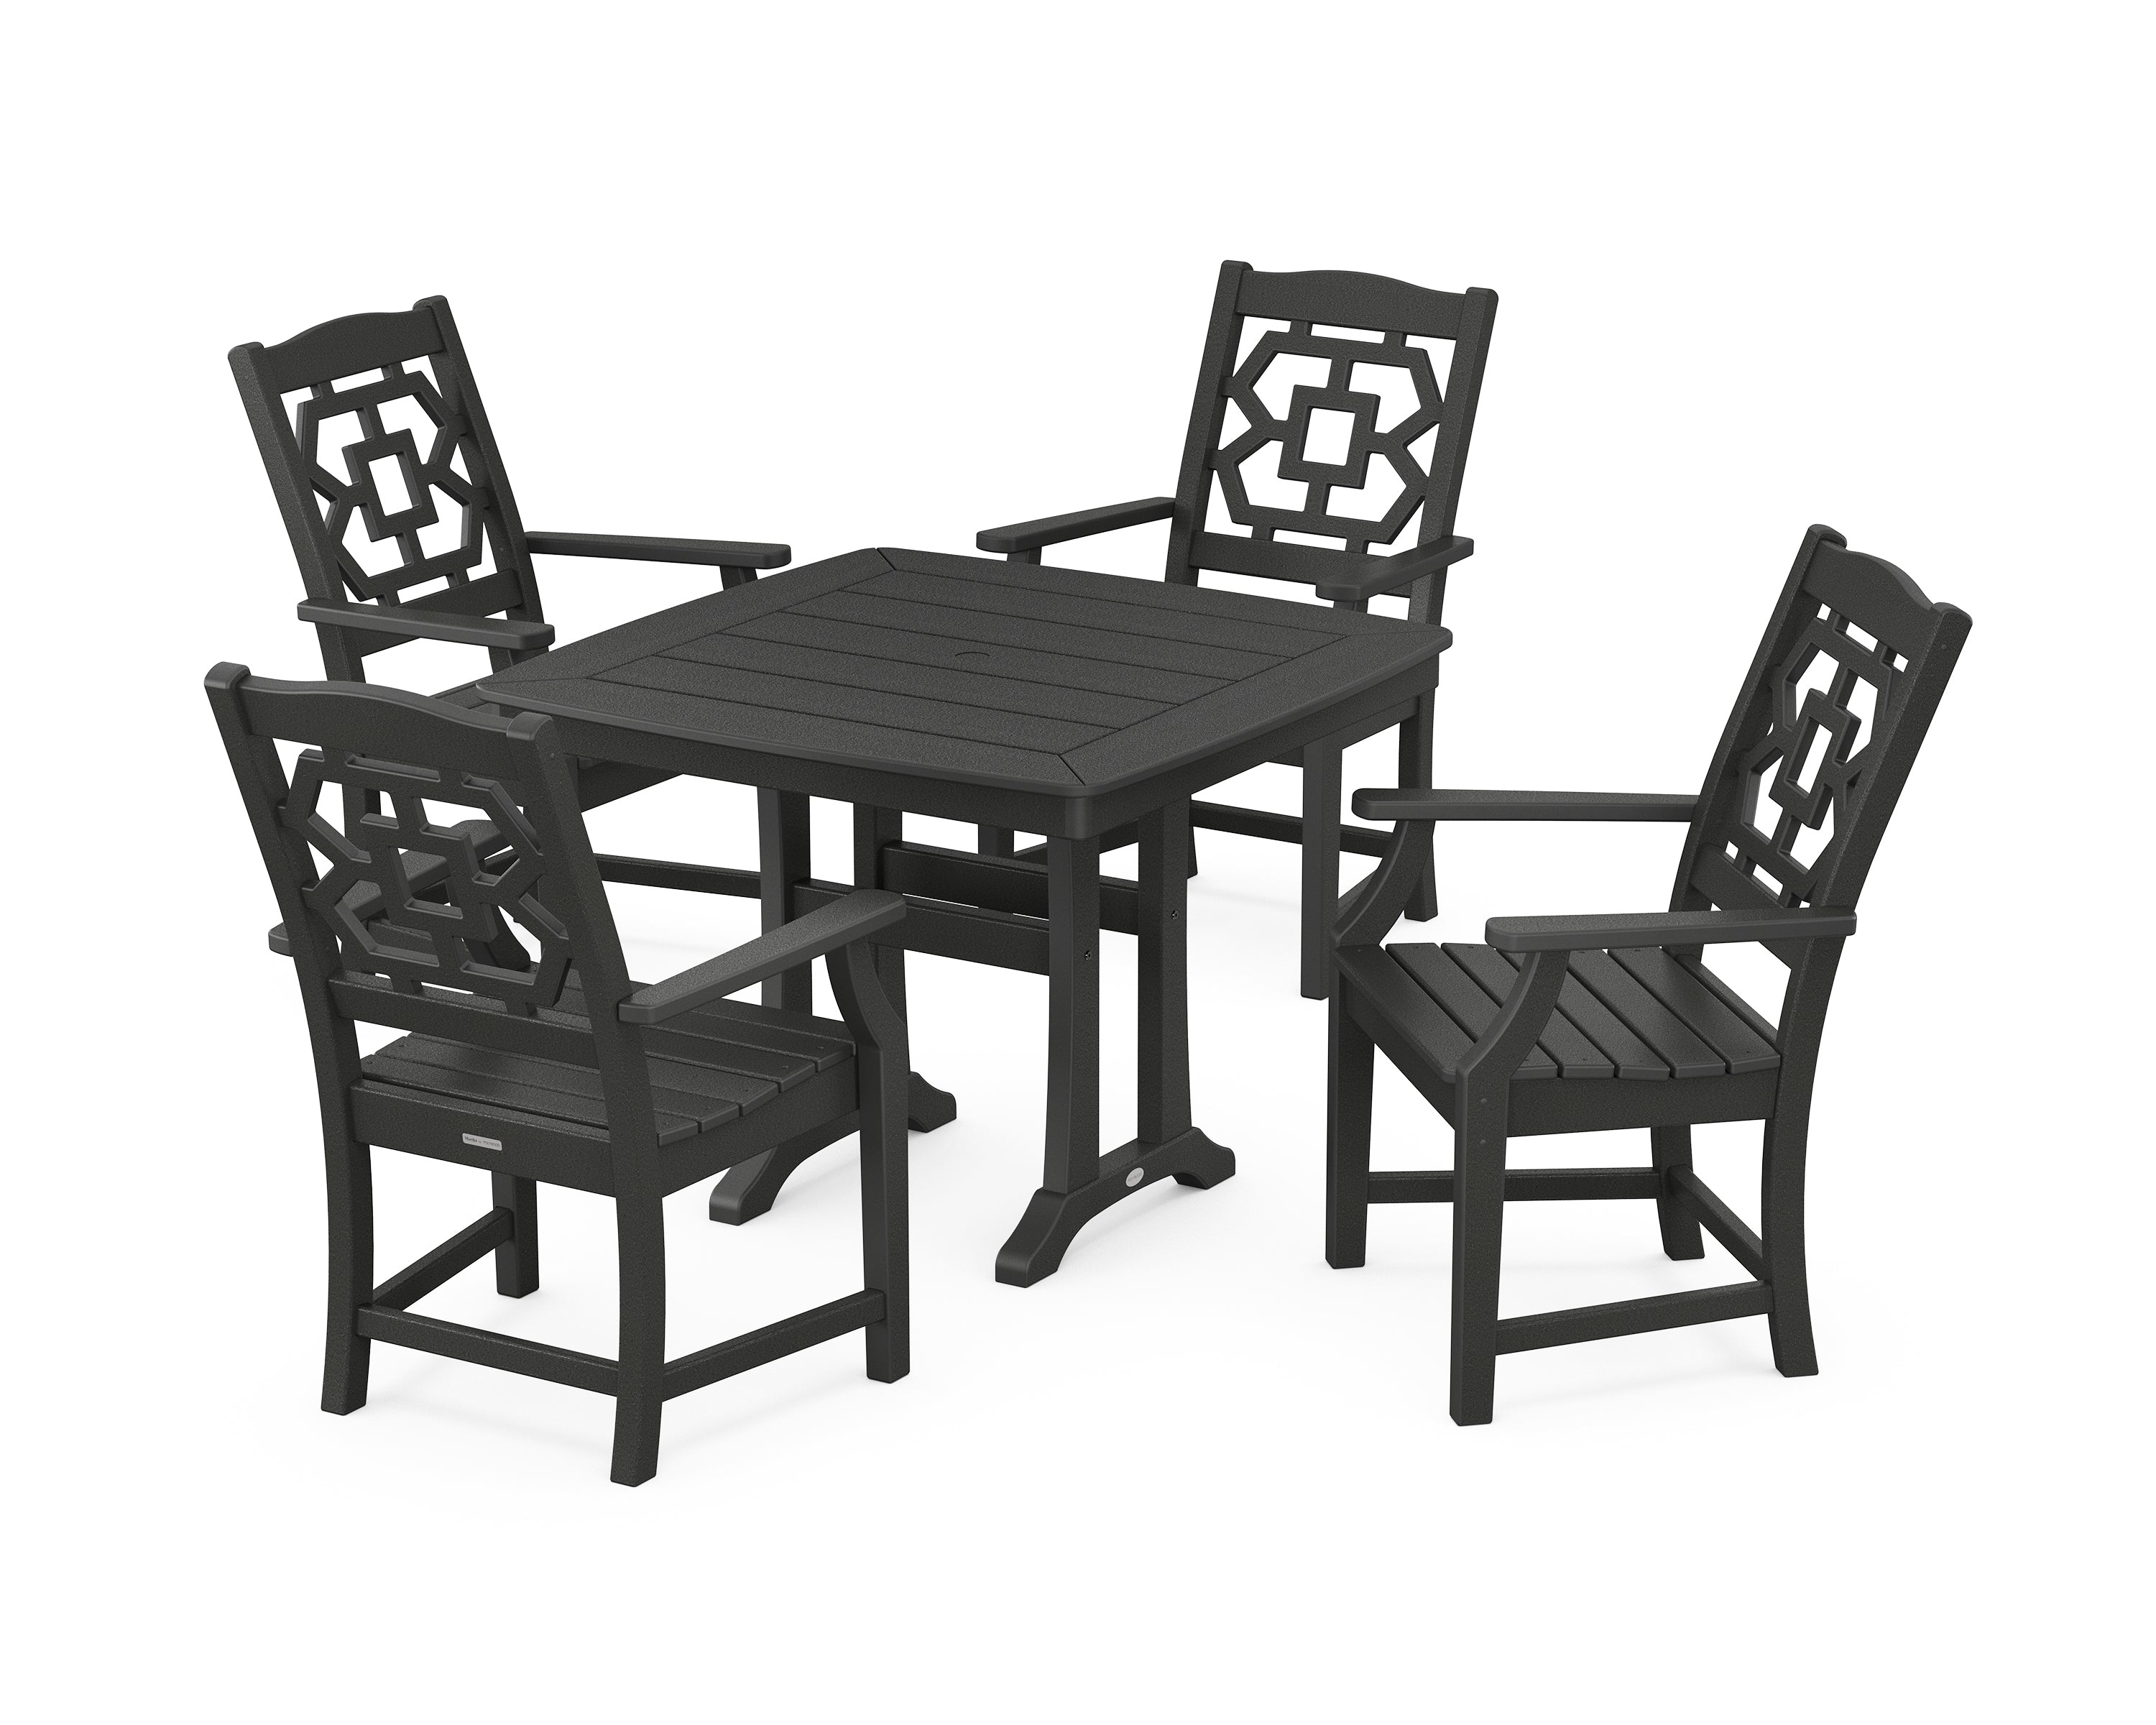 Martha Stewart by POLYWOOD® Chinoiserie 5-Piece Dining Set with Trestle Legs in Black